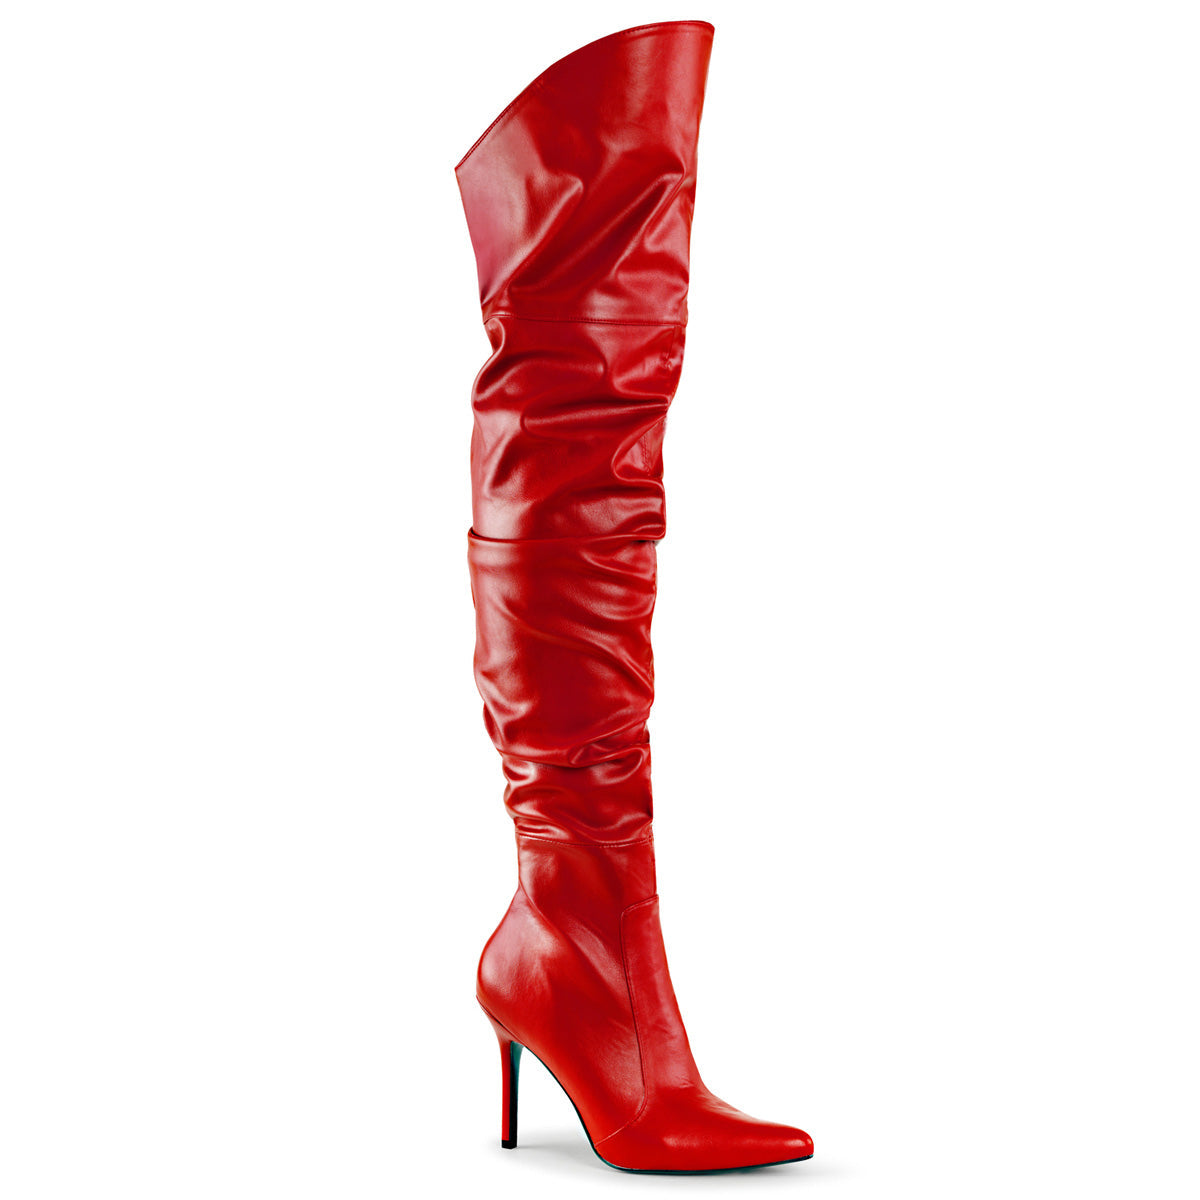 CLASSIQUE-3011 Thigh High Boots